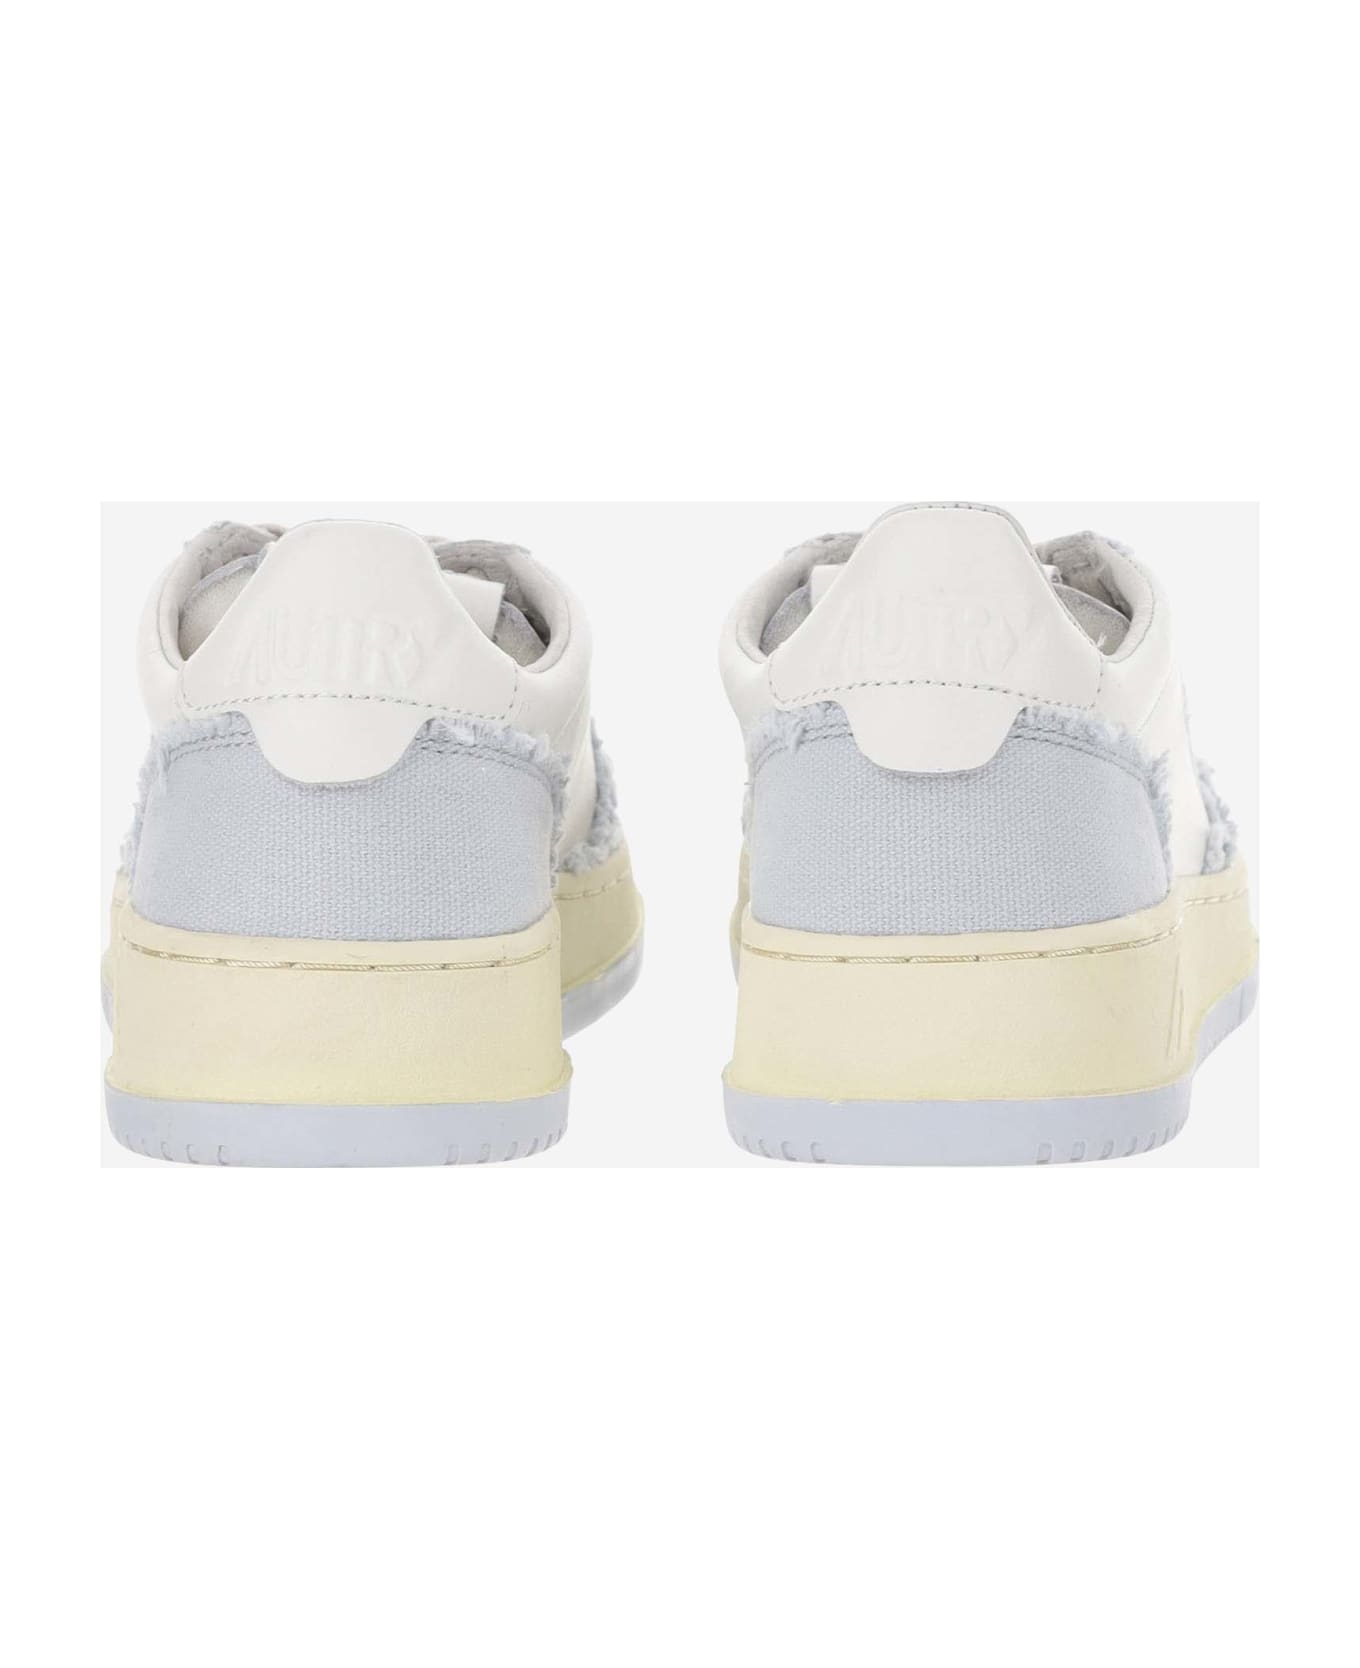 Autry Low Medalist Leather Sneakers - Grey スニーカー